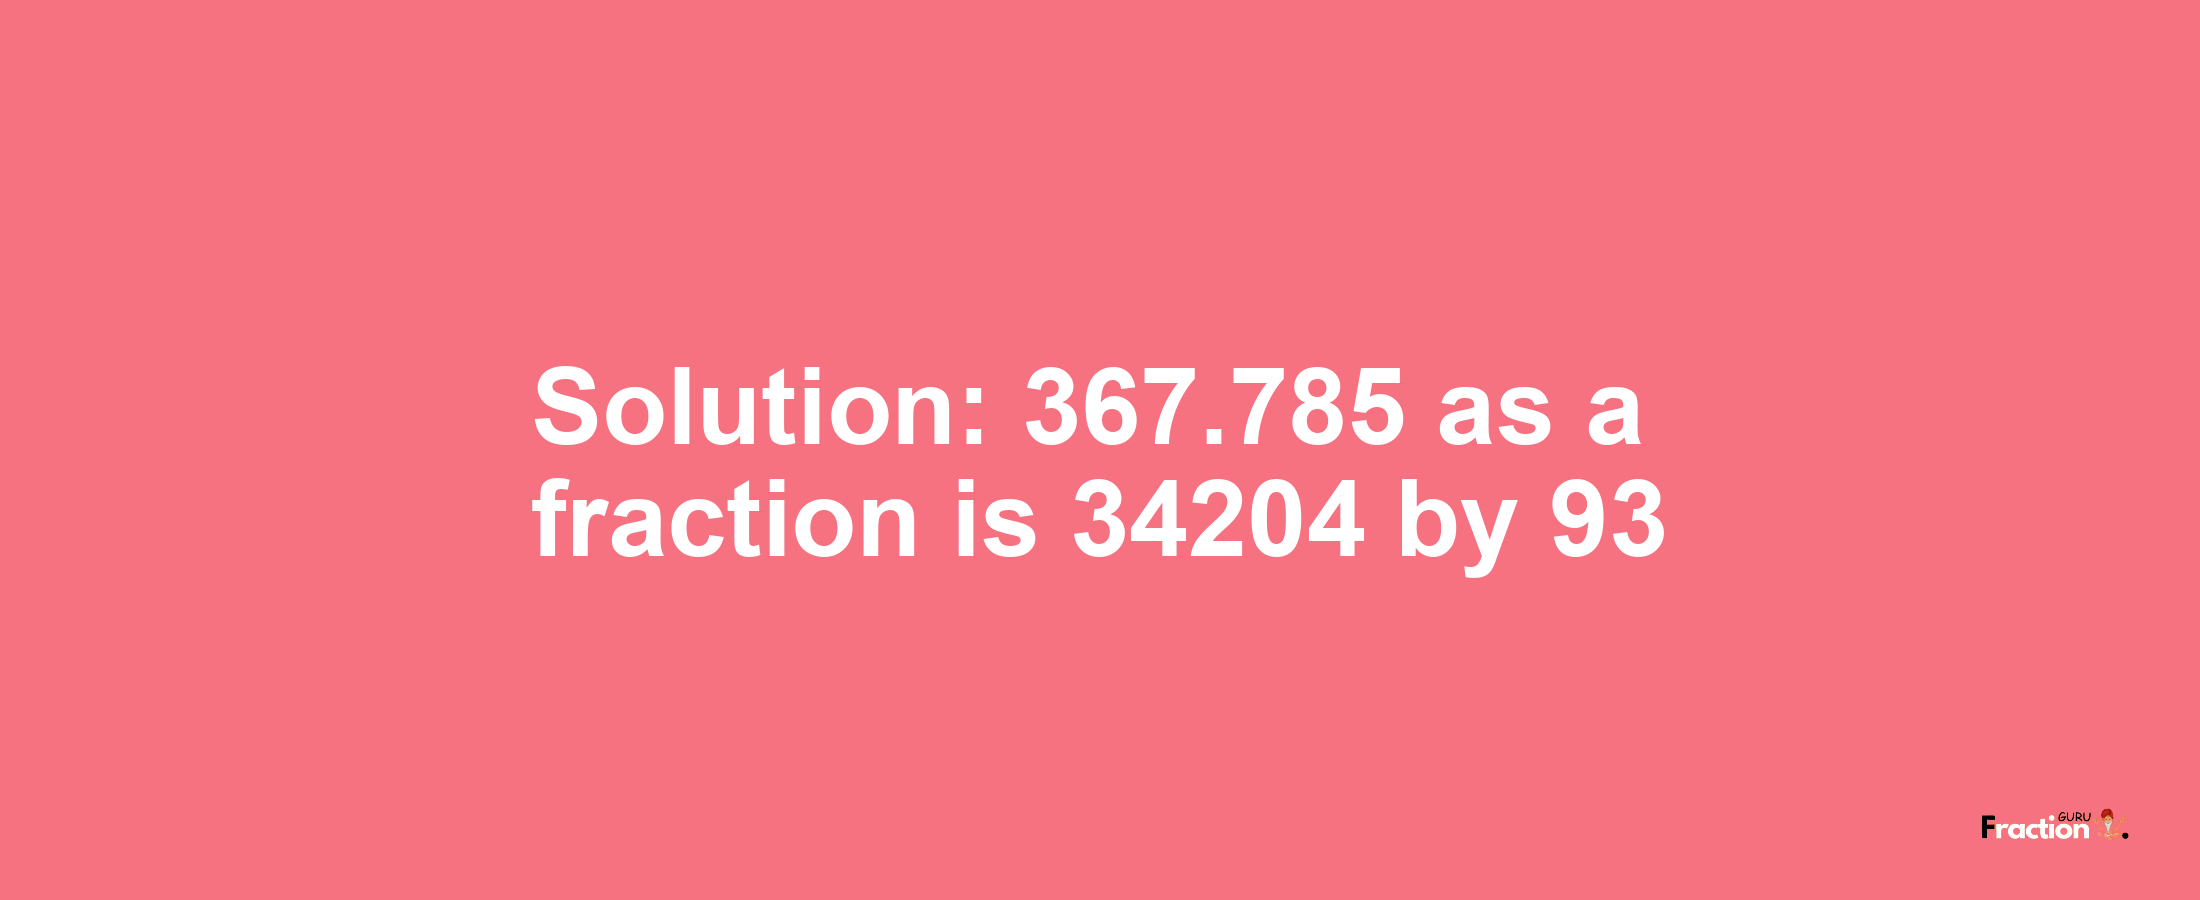 Solution:367.785 as a fraction is 34204/93